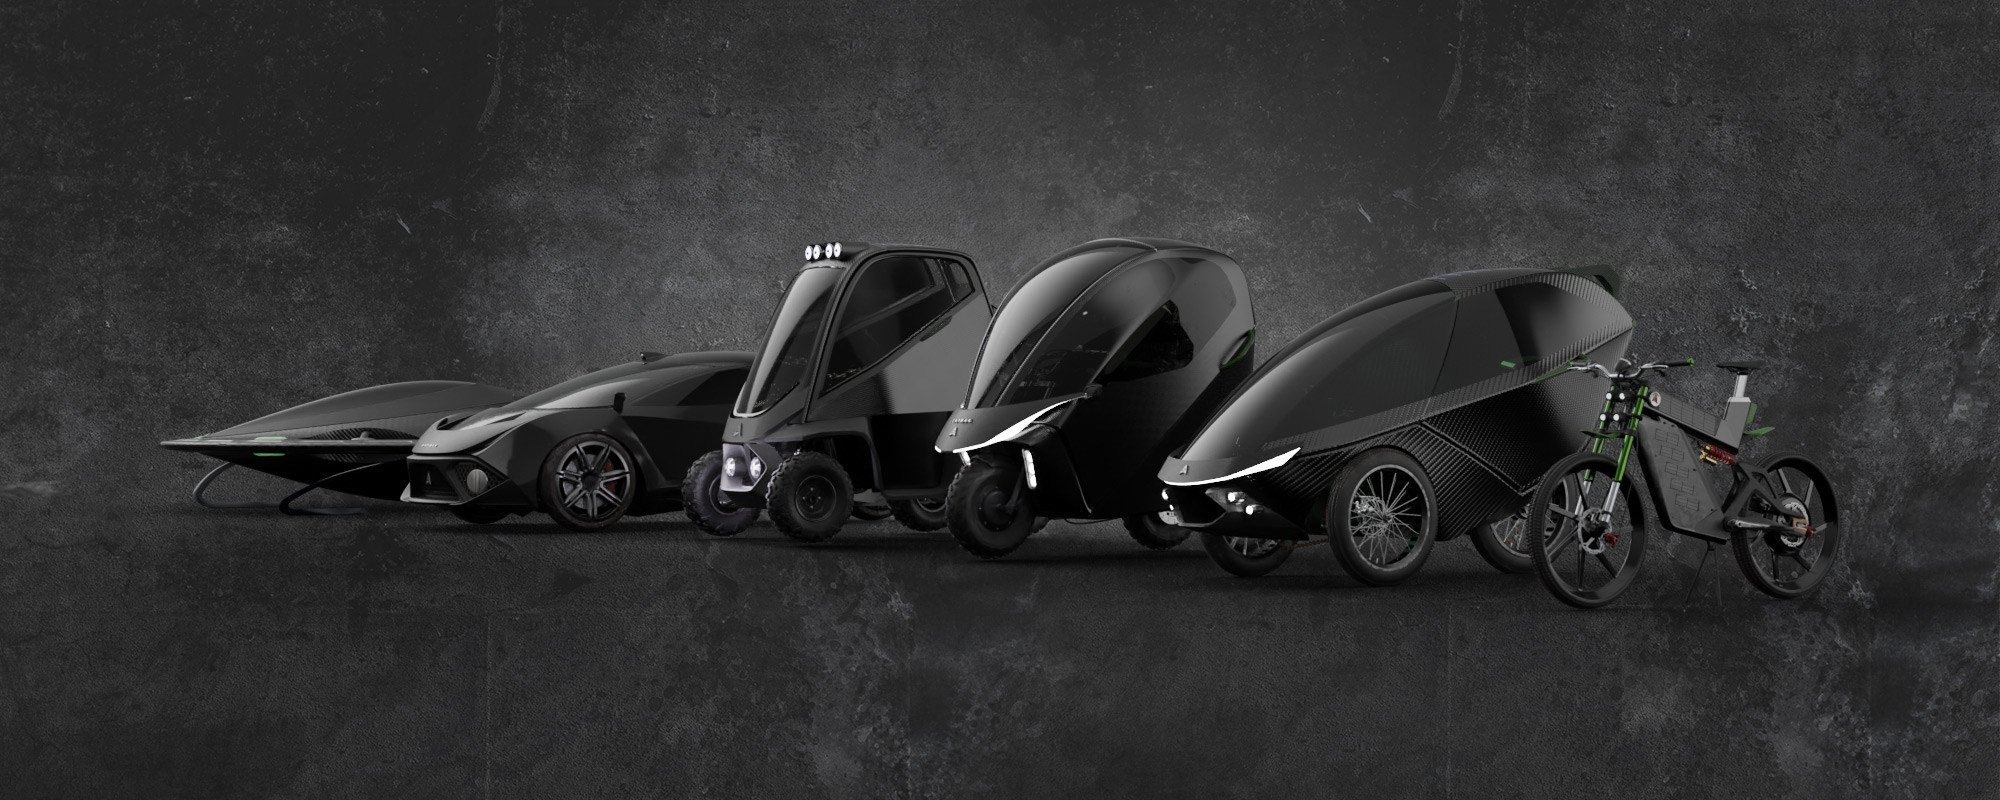 Daymak Spiritus unveiled as 'world's fastest' 3wheeled electric car